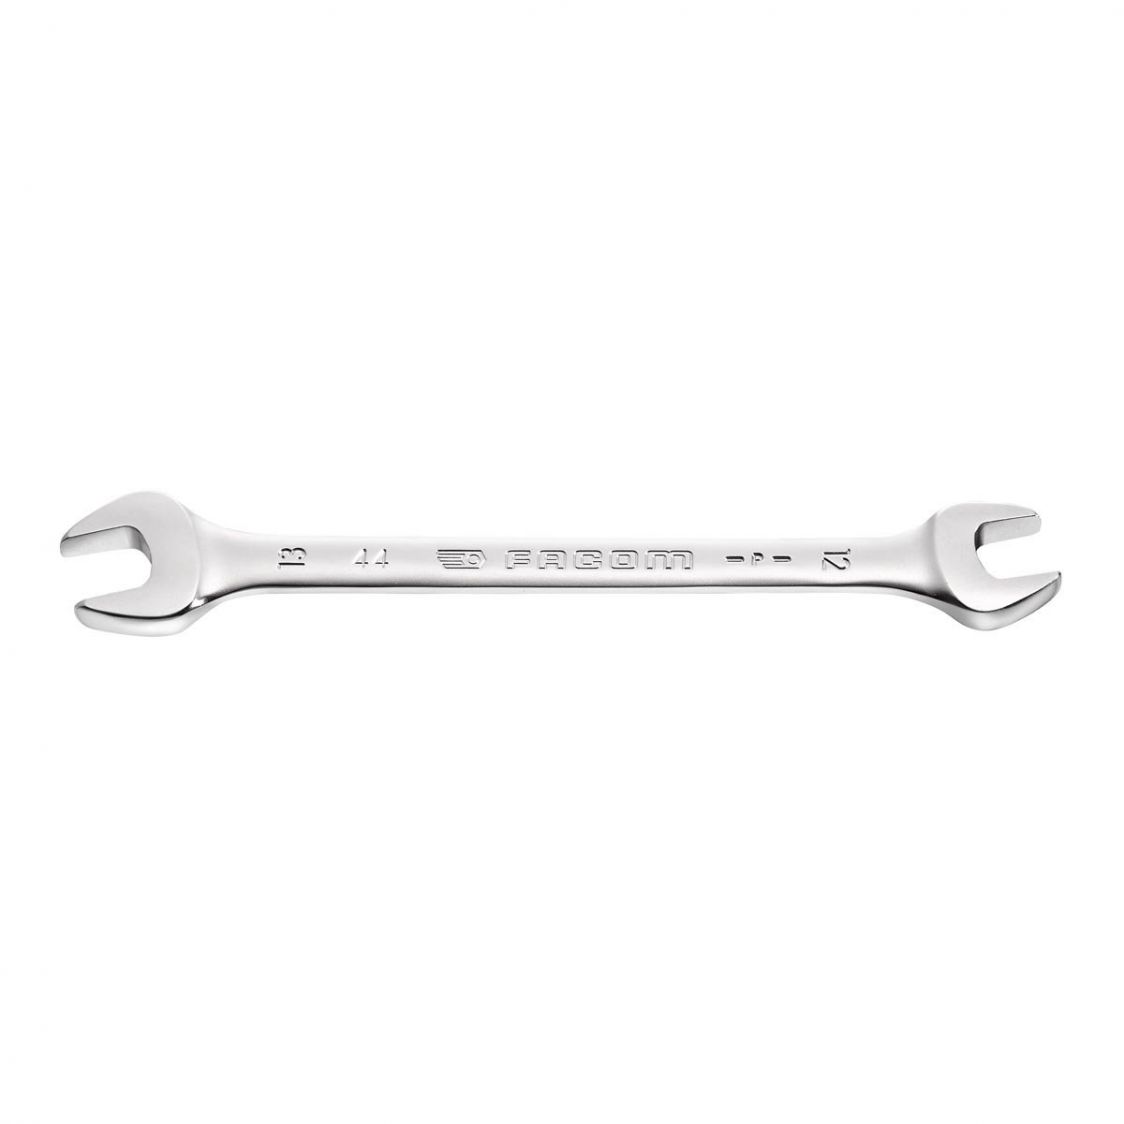 FACOM 44.10X11 - 10x11mm Metric Open Jaw Spanner